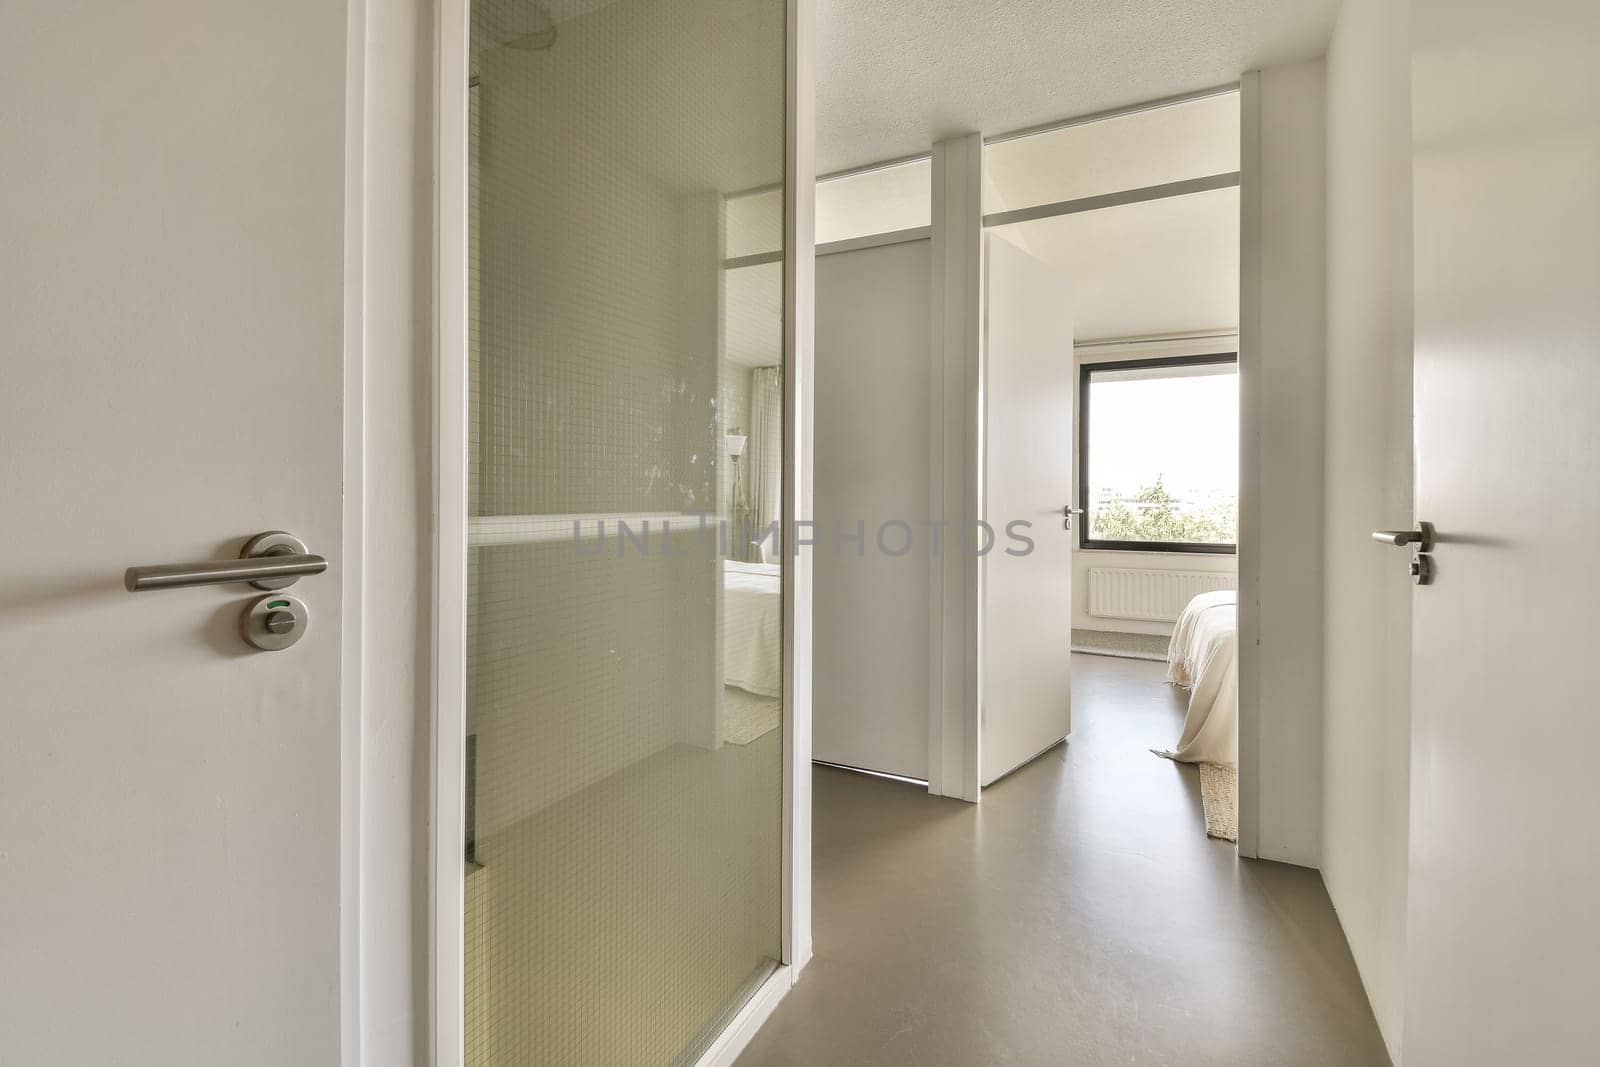 a bathroom with a shower and toilet in the corner, as seen through an open door on the right side